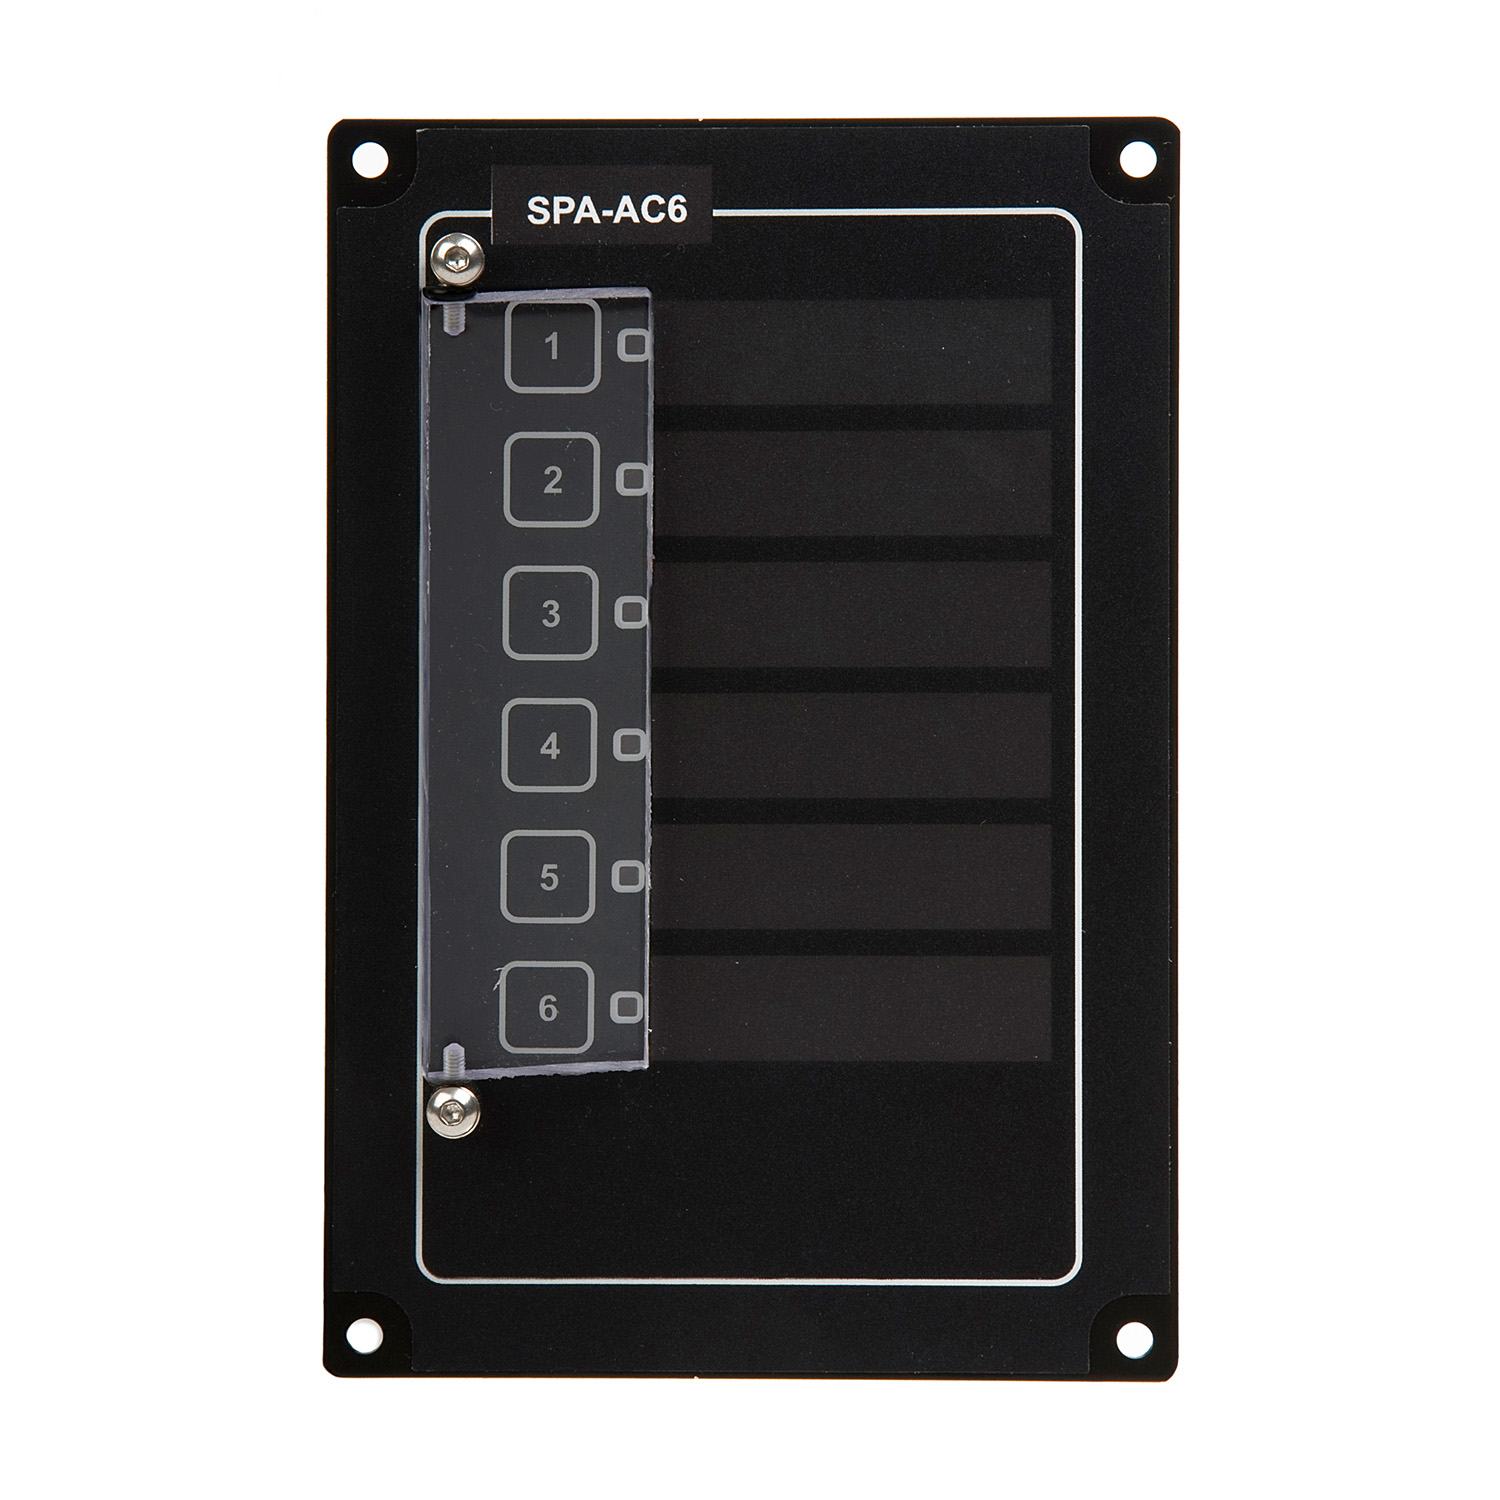 3005010096 SPA-AC6-D Dual alarm panel  with covered and ill. alarm start and reset button